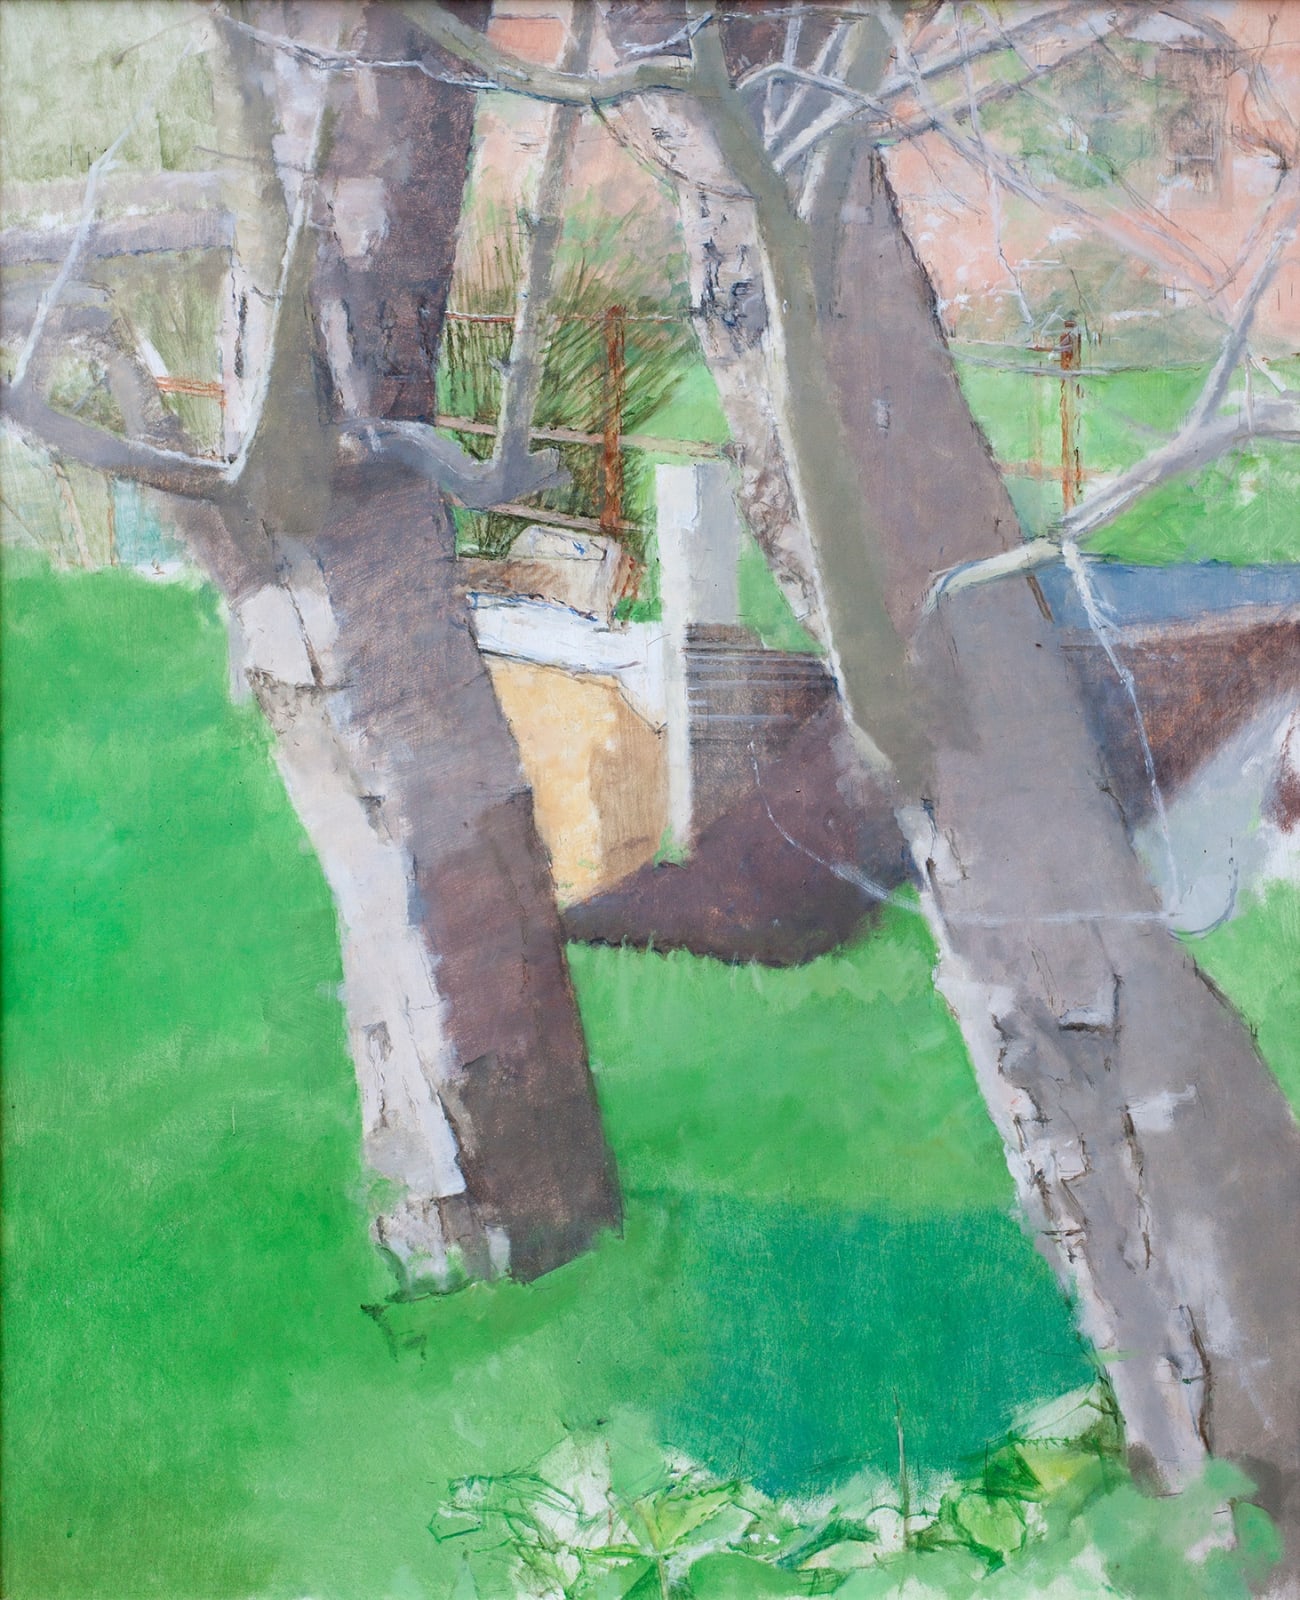 PATRICK GEORGE, Two Leaning Greengage Trees, 2000